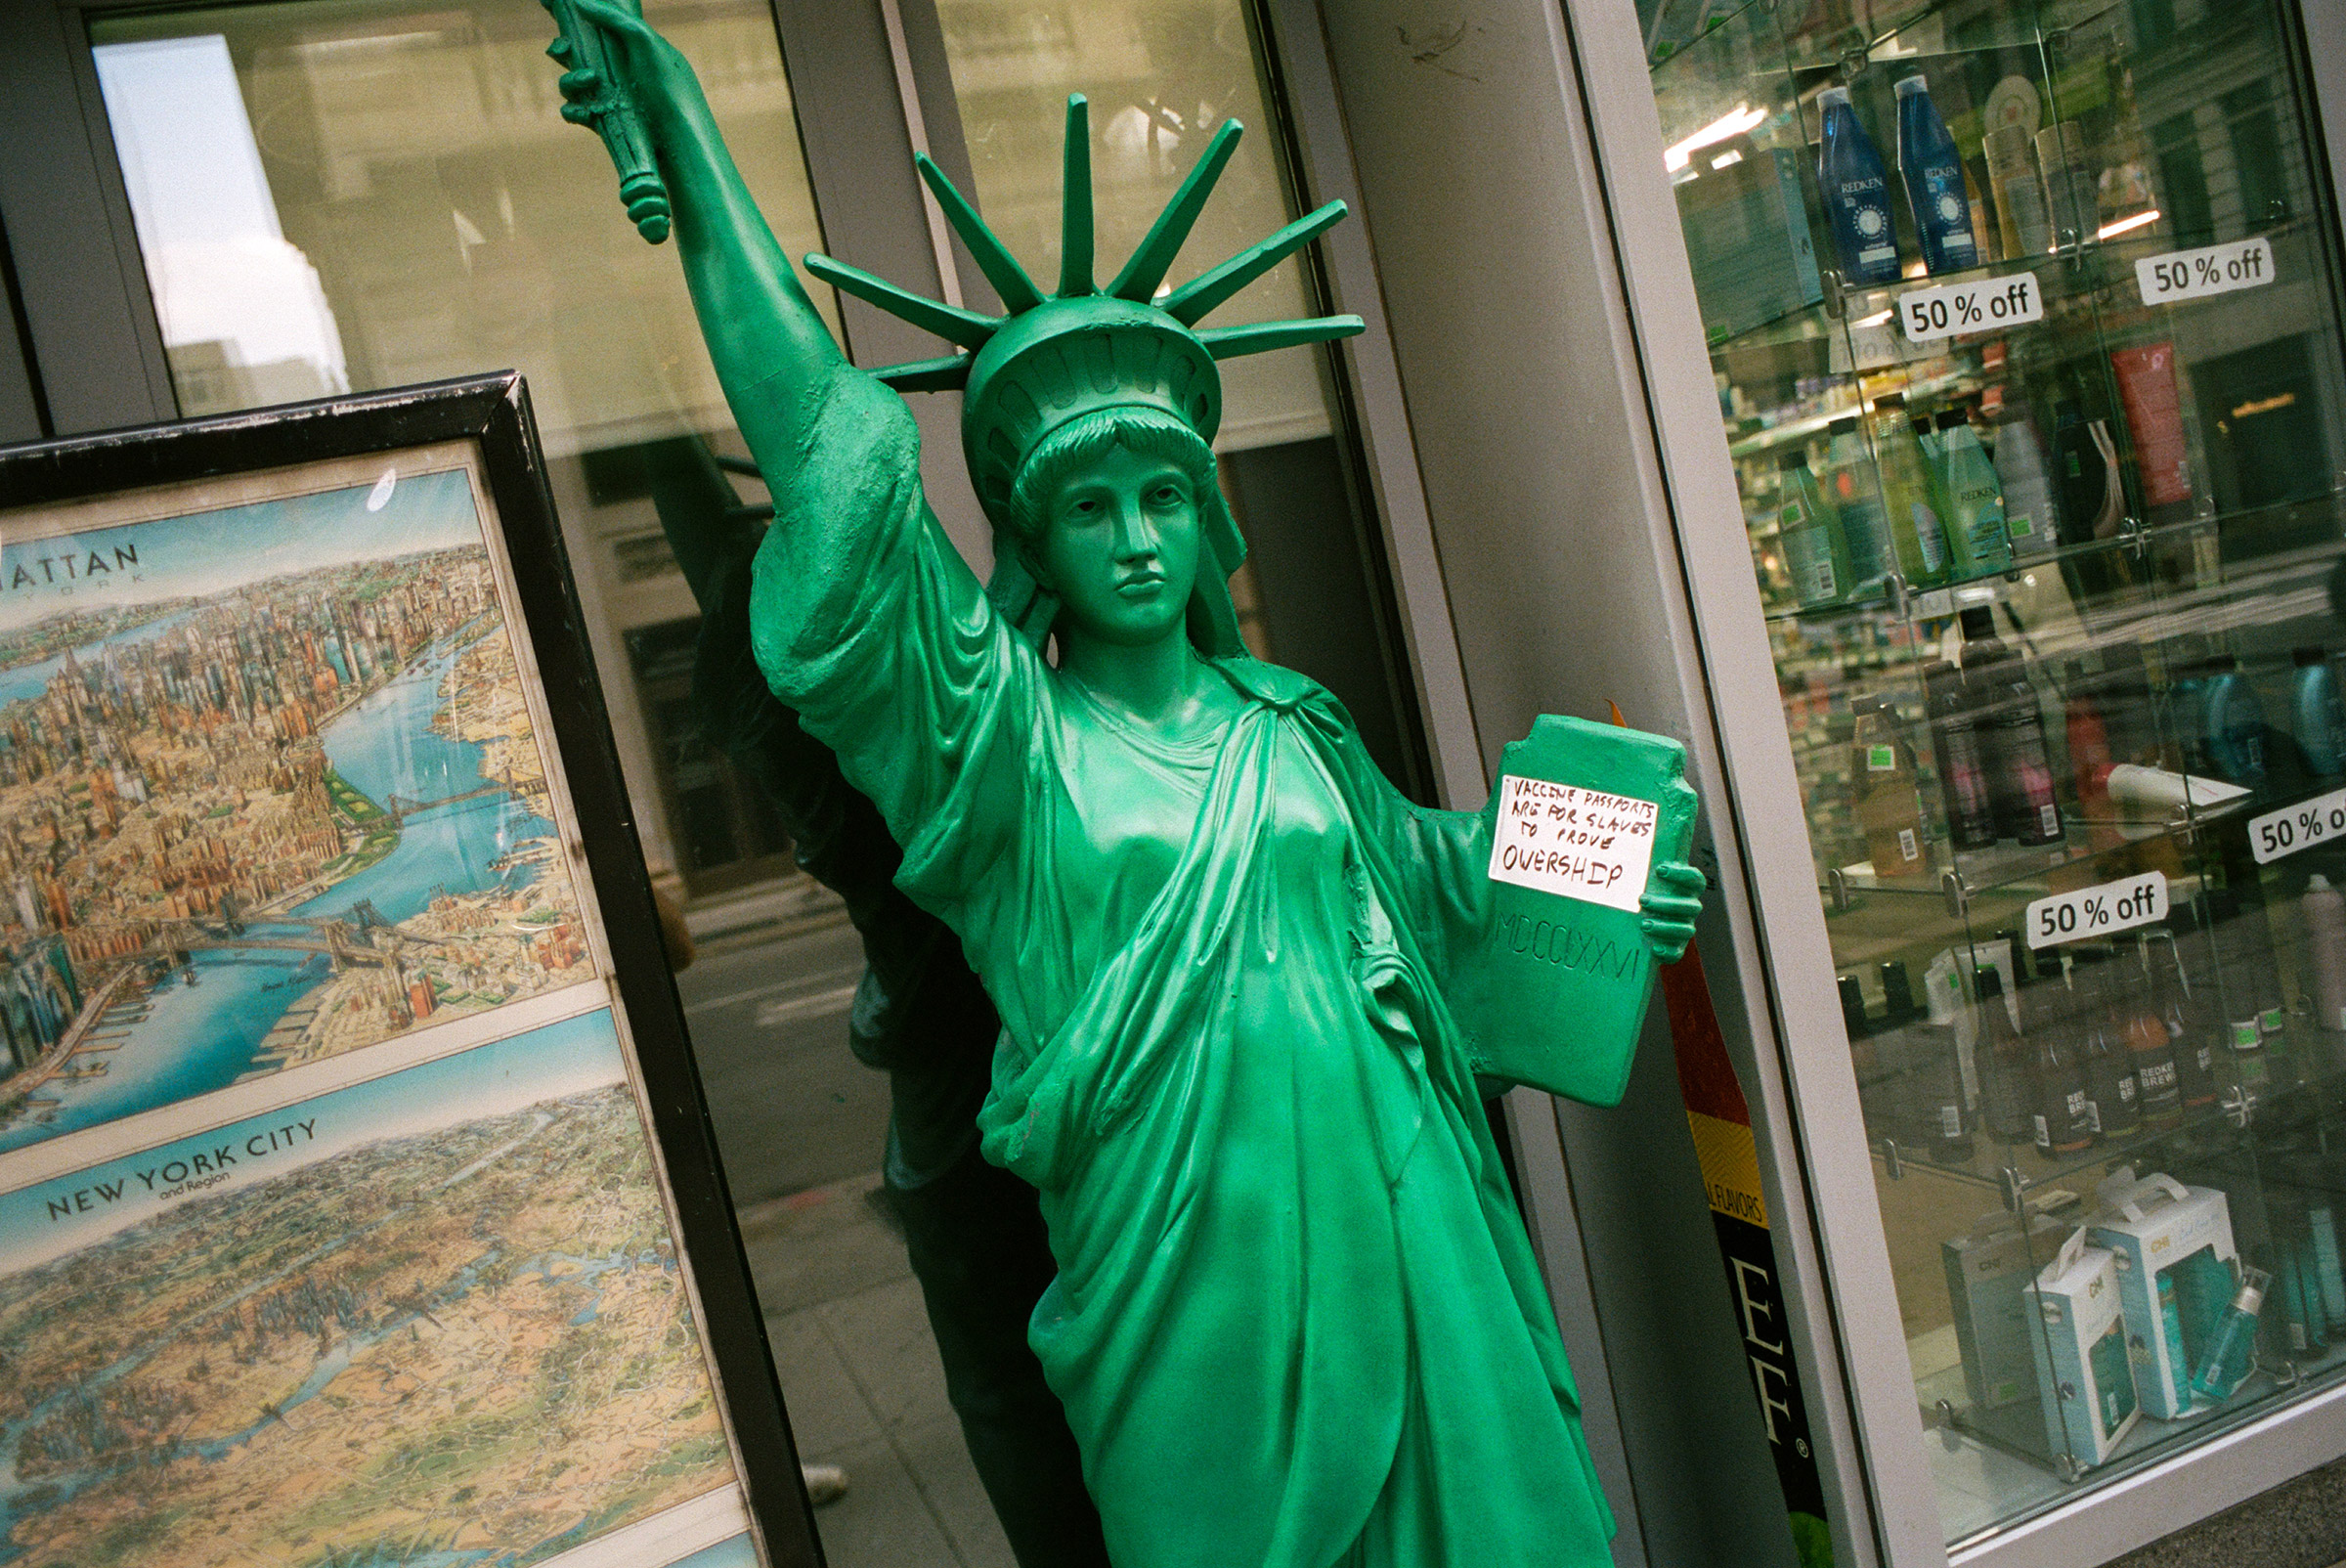 A prop Statue Of Liberty inadvertently advertises an anti-vaccination protestor message on her tablet, Aug. 26, 2021.